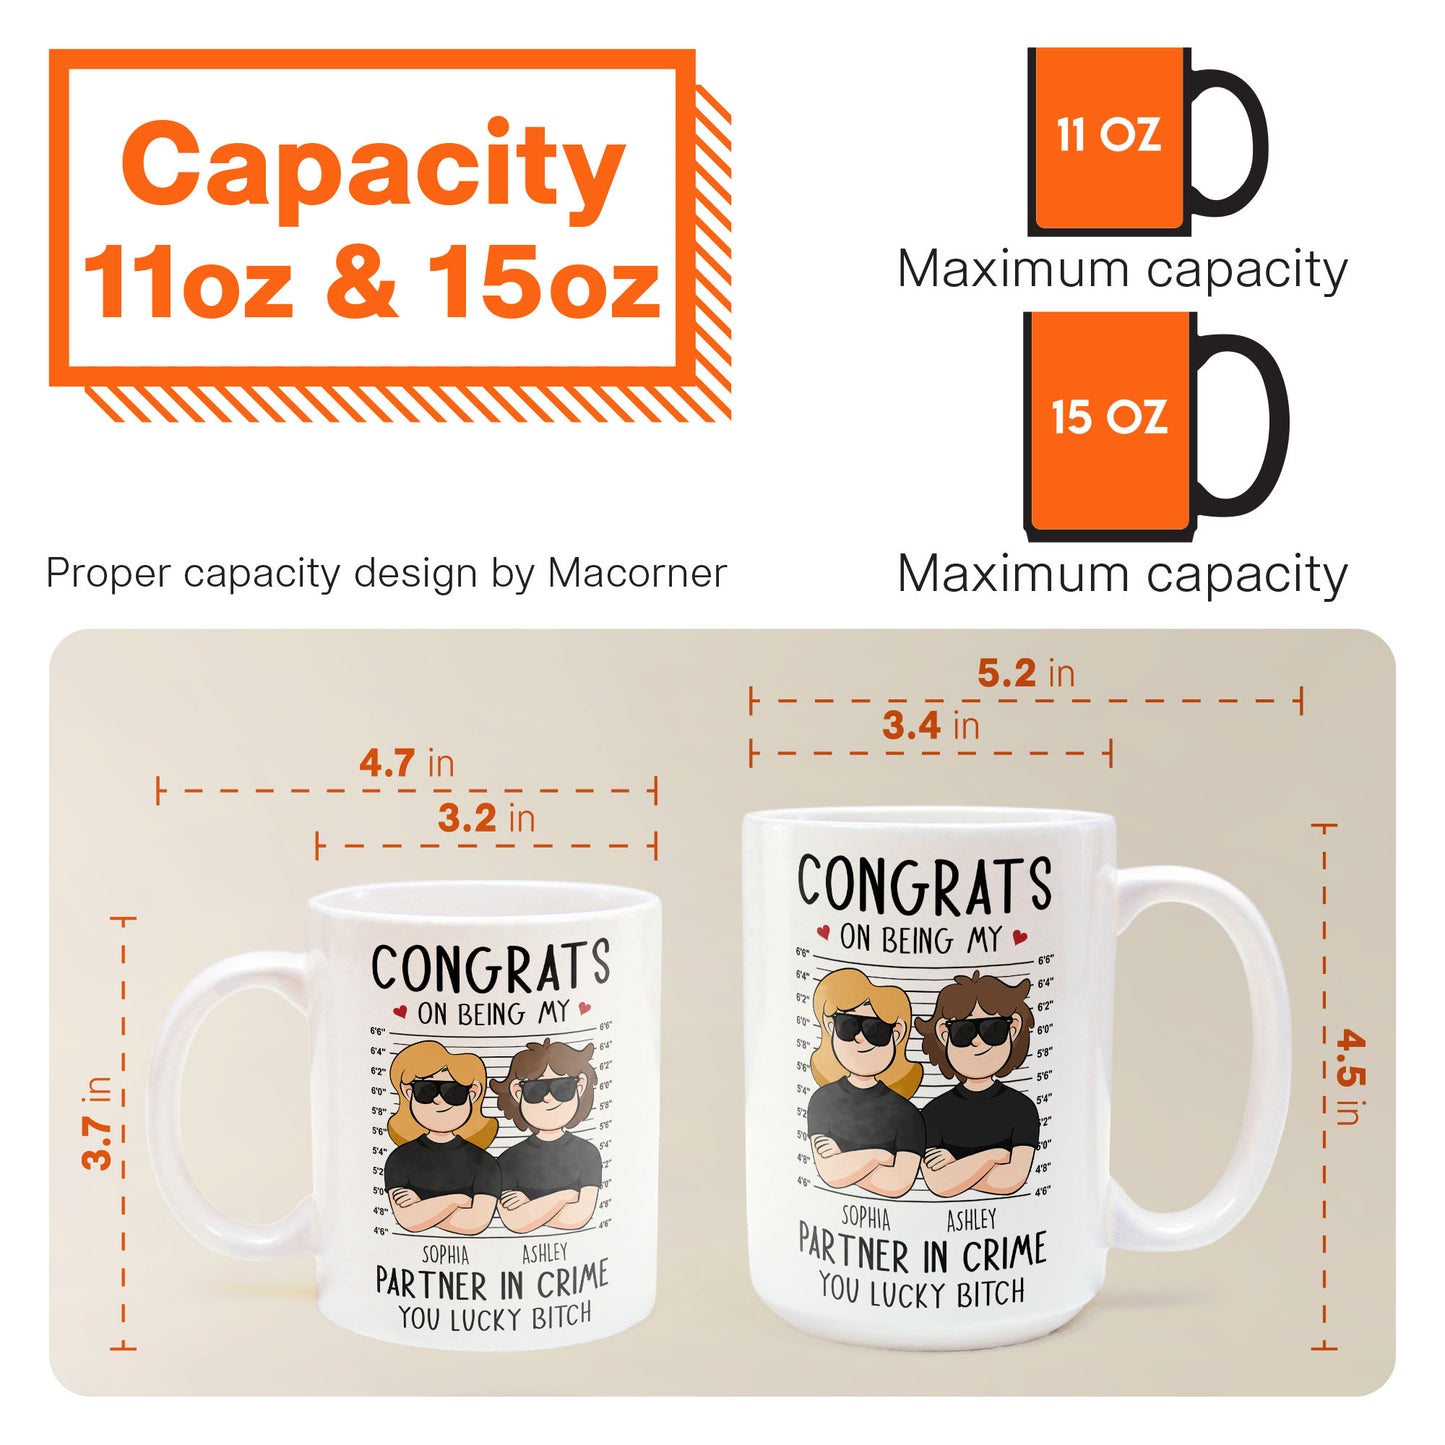 Congrats On Being My Partner In Crime - Personalized Mug